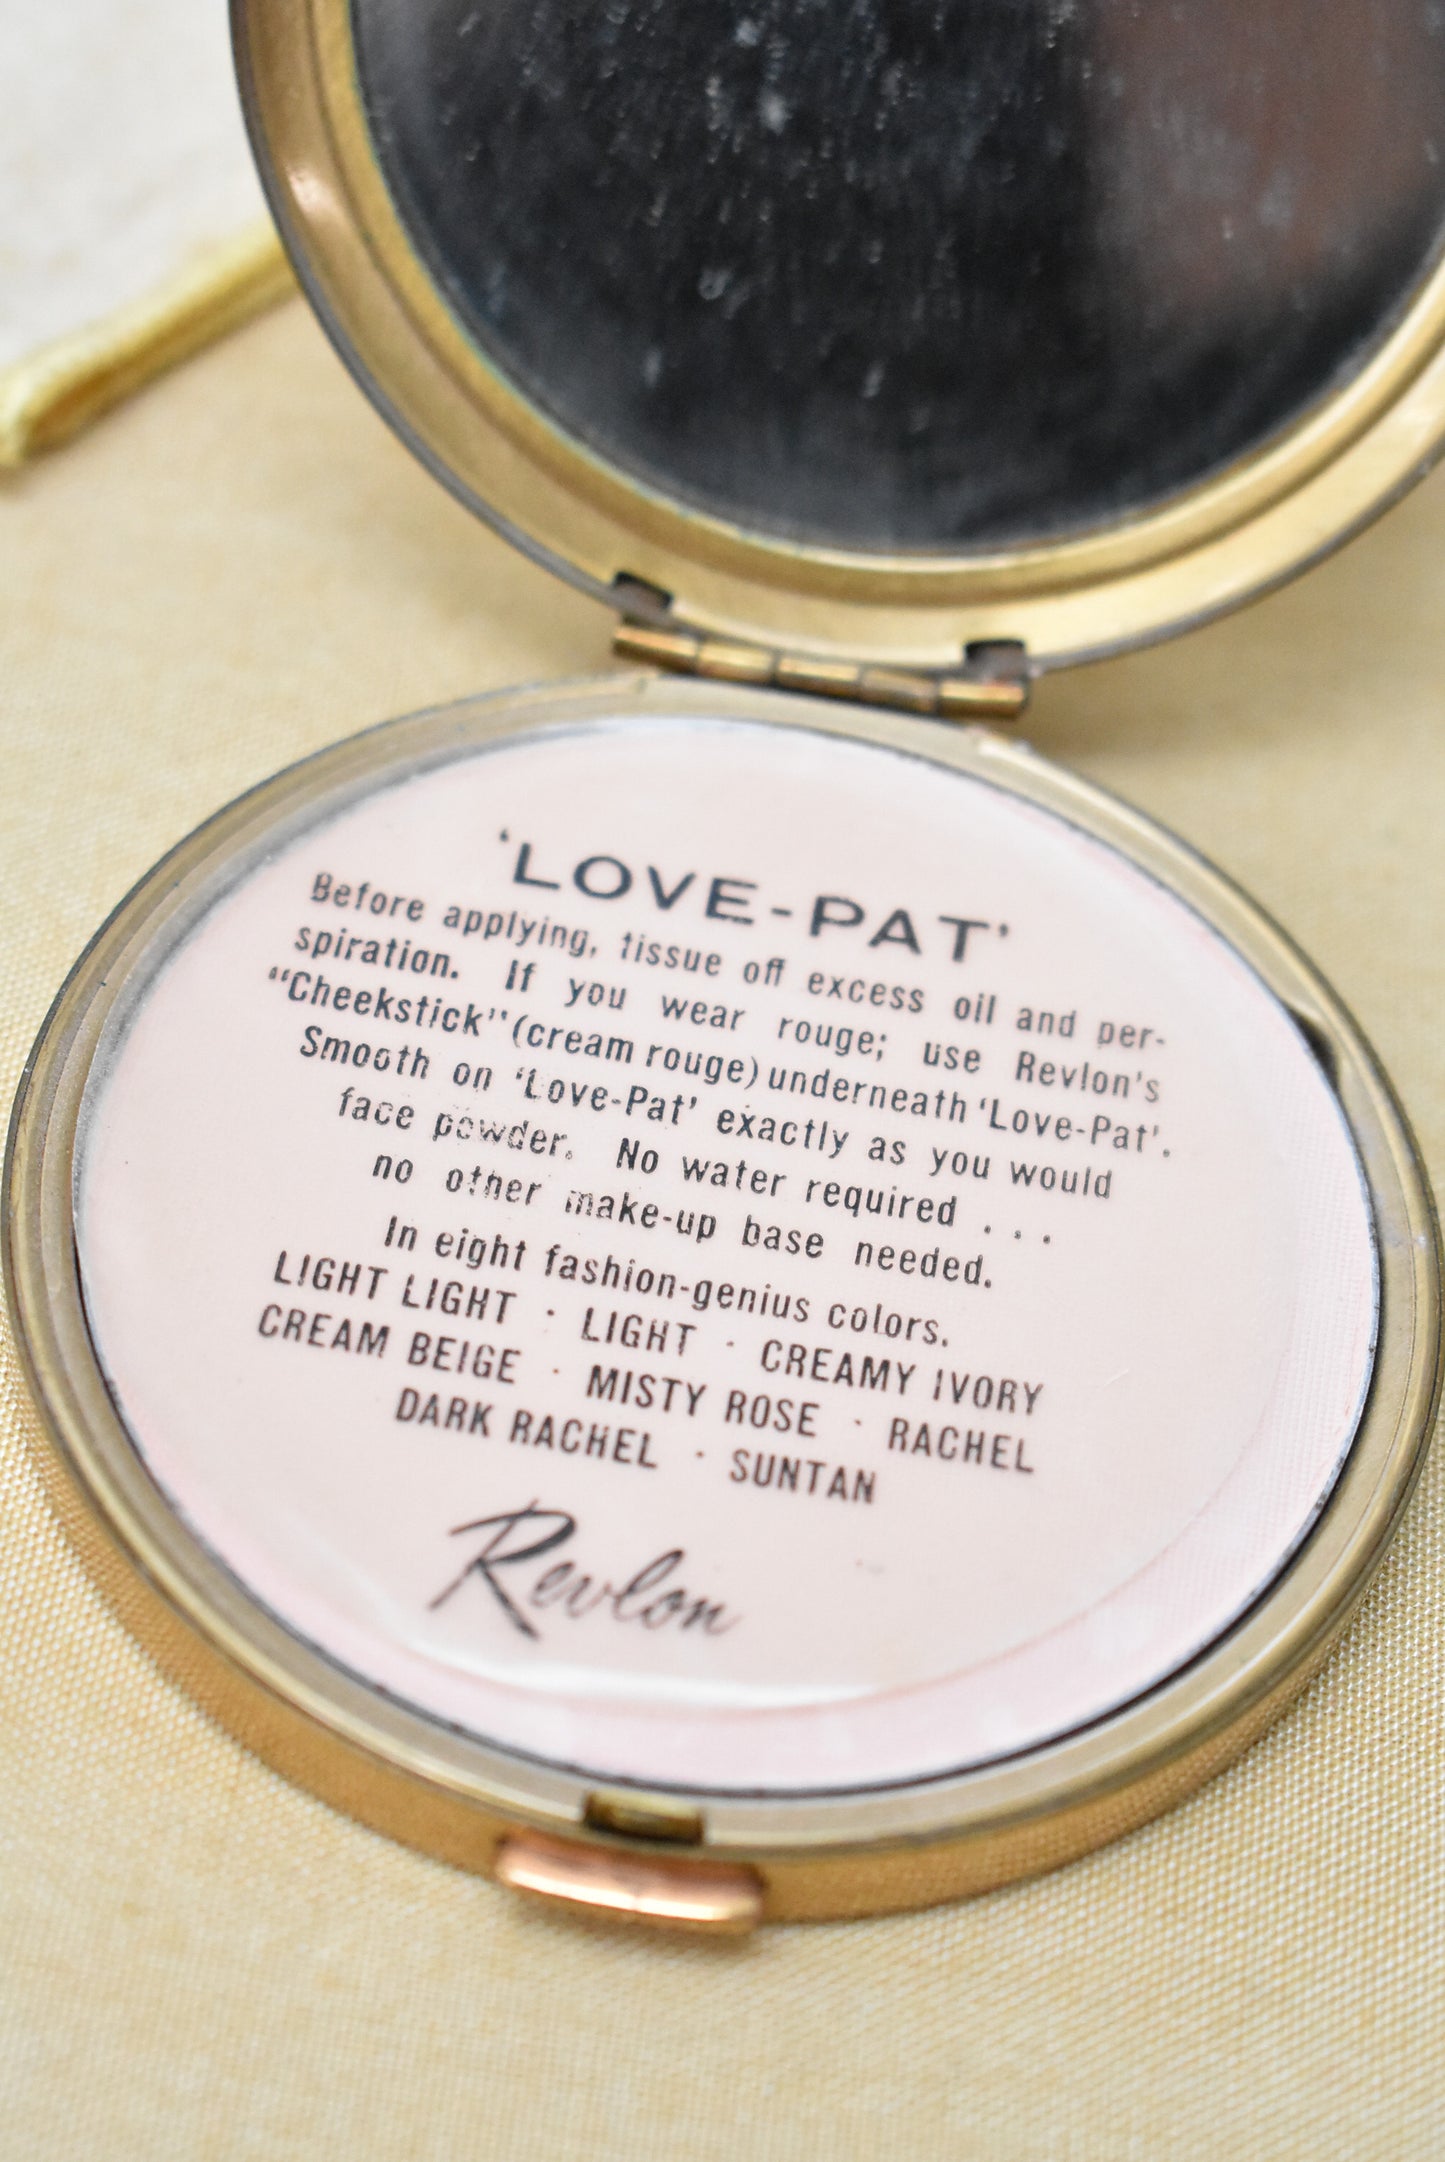 Vintage Revlon 'Love Pat' pressed powder in clamshell compact with mirror